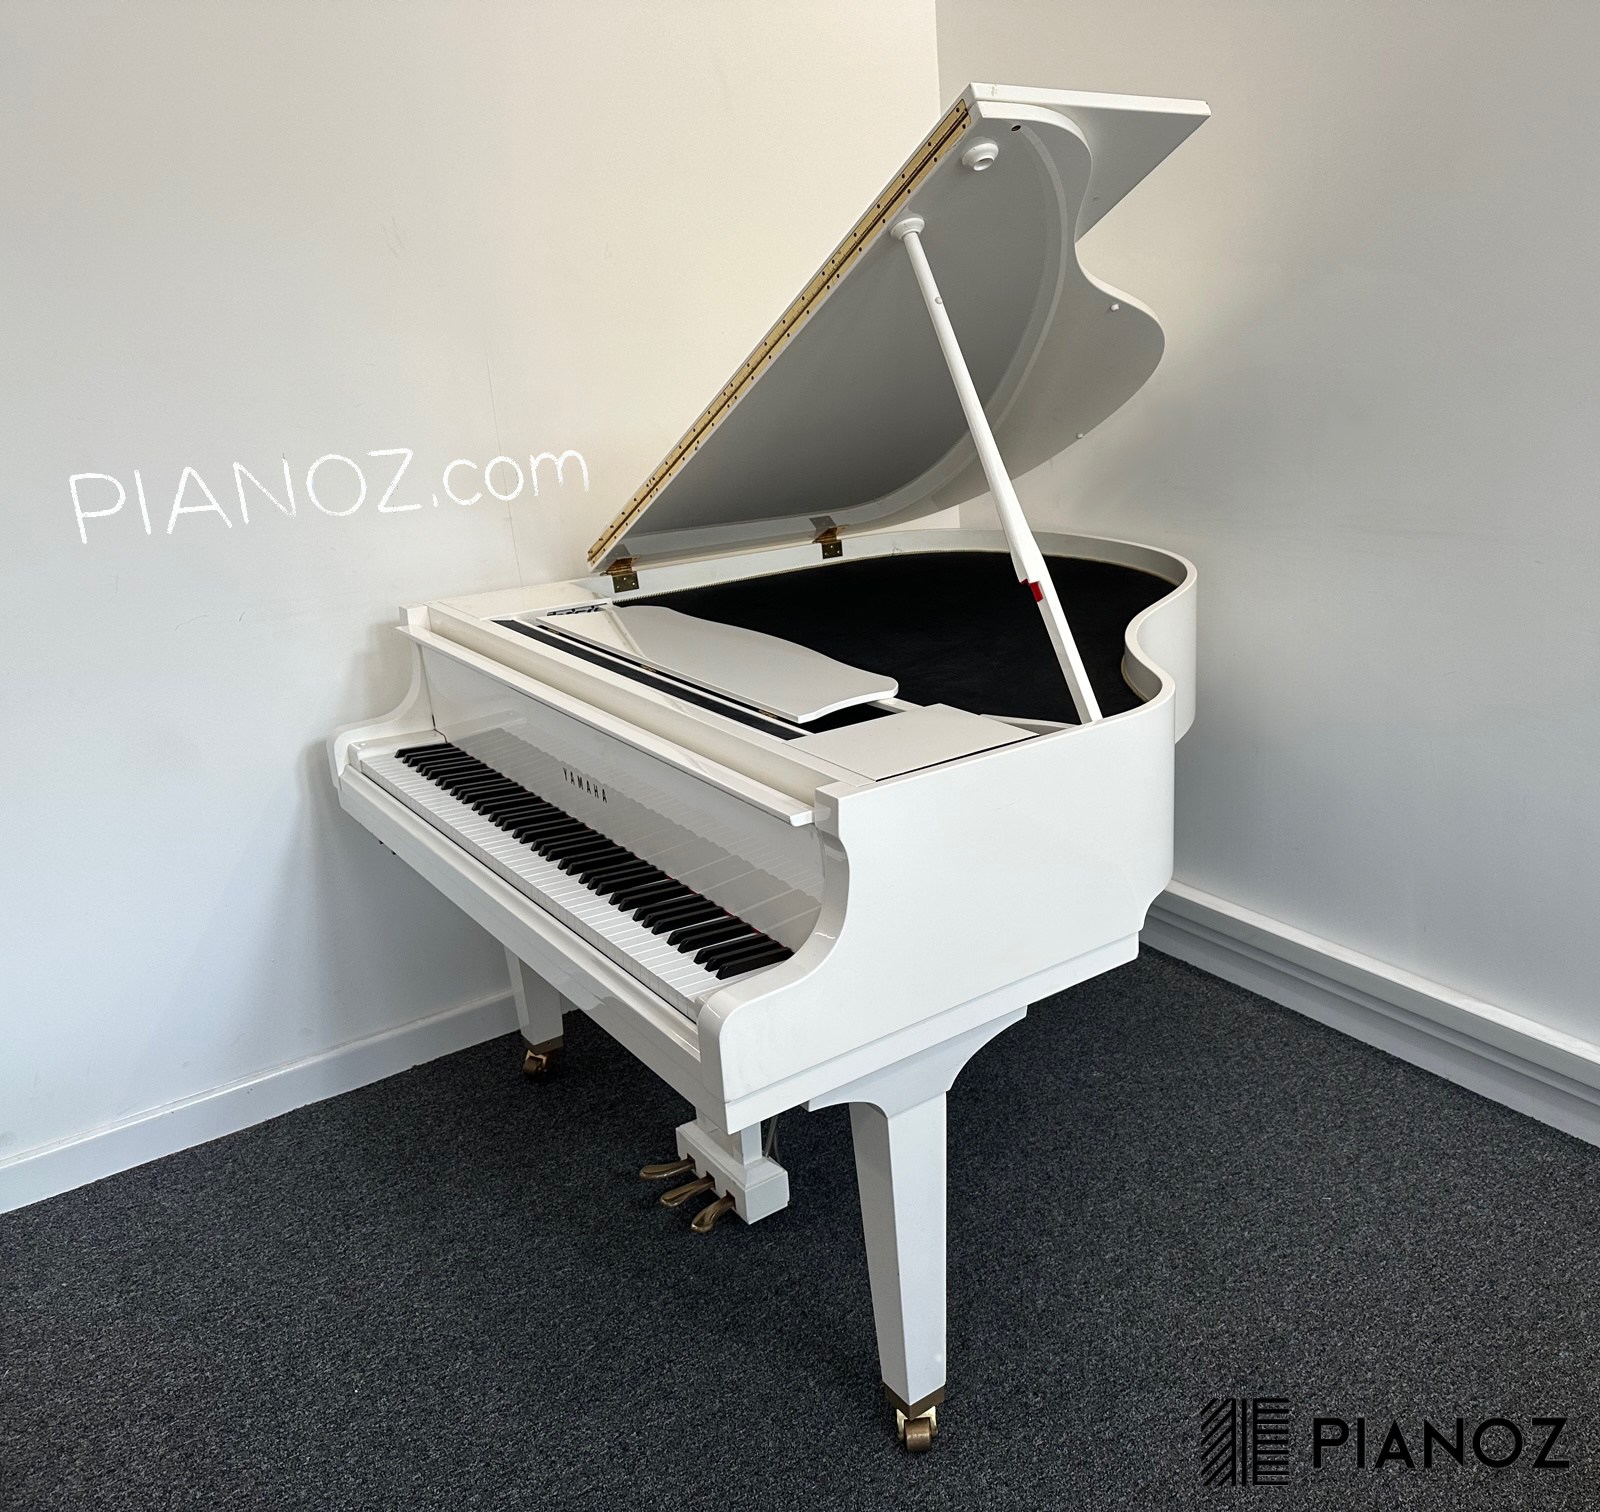 Yamaha Disklavier Self Playing Baby Grand Piano piano for sale in UK